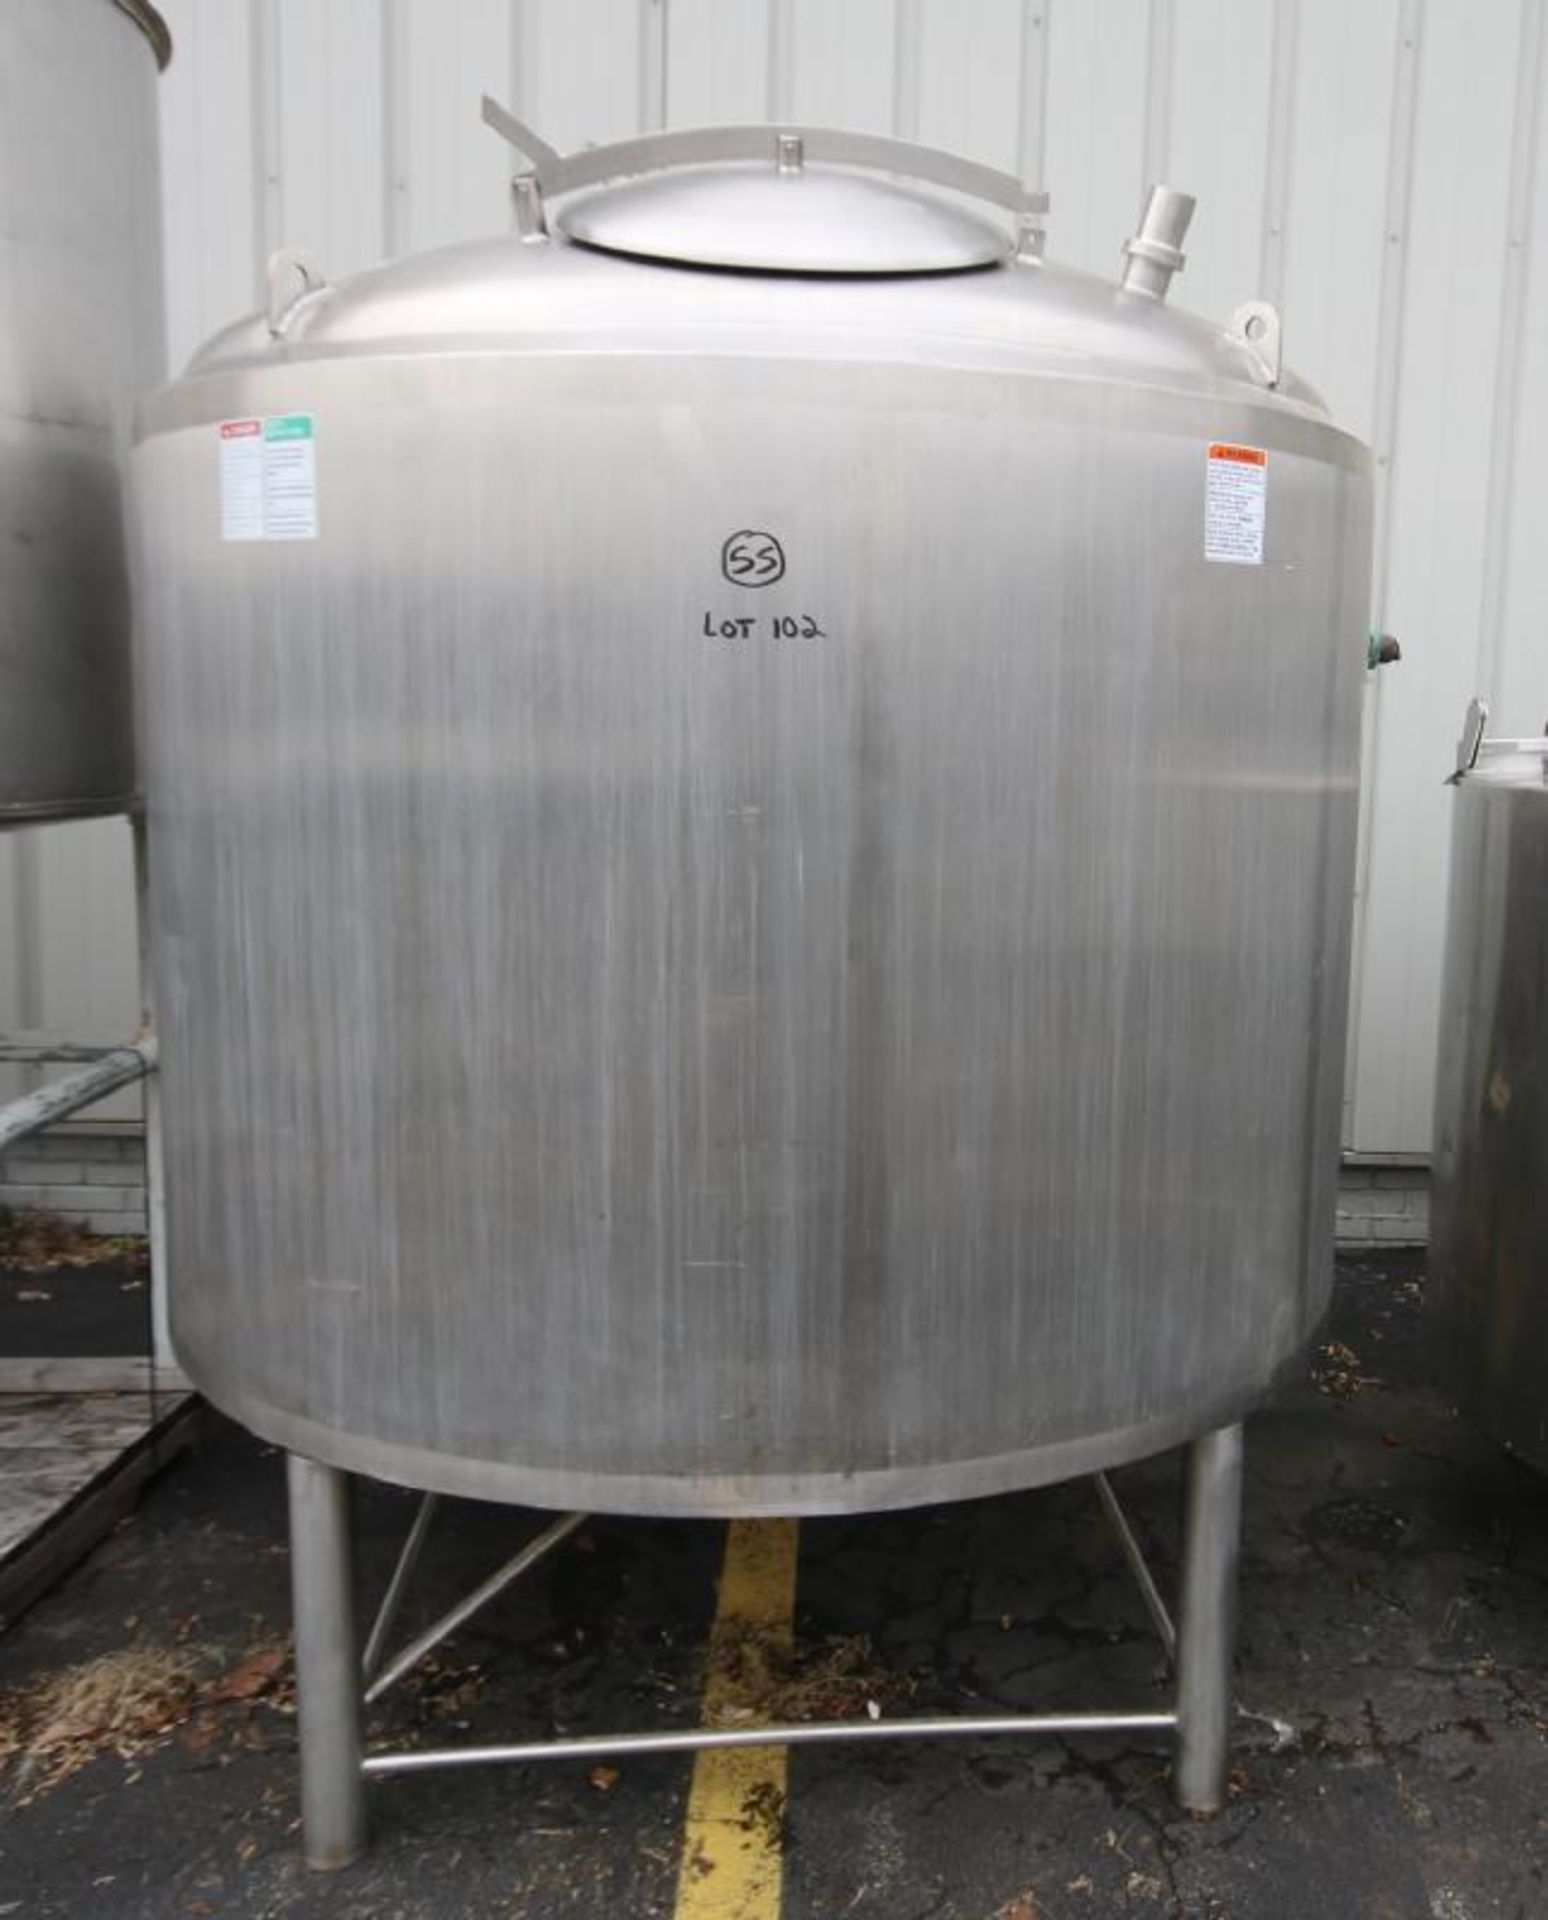 Crepaco Aprox. 500 Gal. Dome Top Cone Bottom Jacketed S/S Tank, SN K-1985, Includes Top Hinged Man